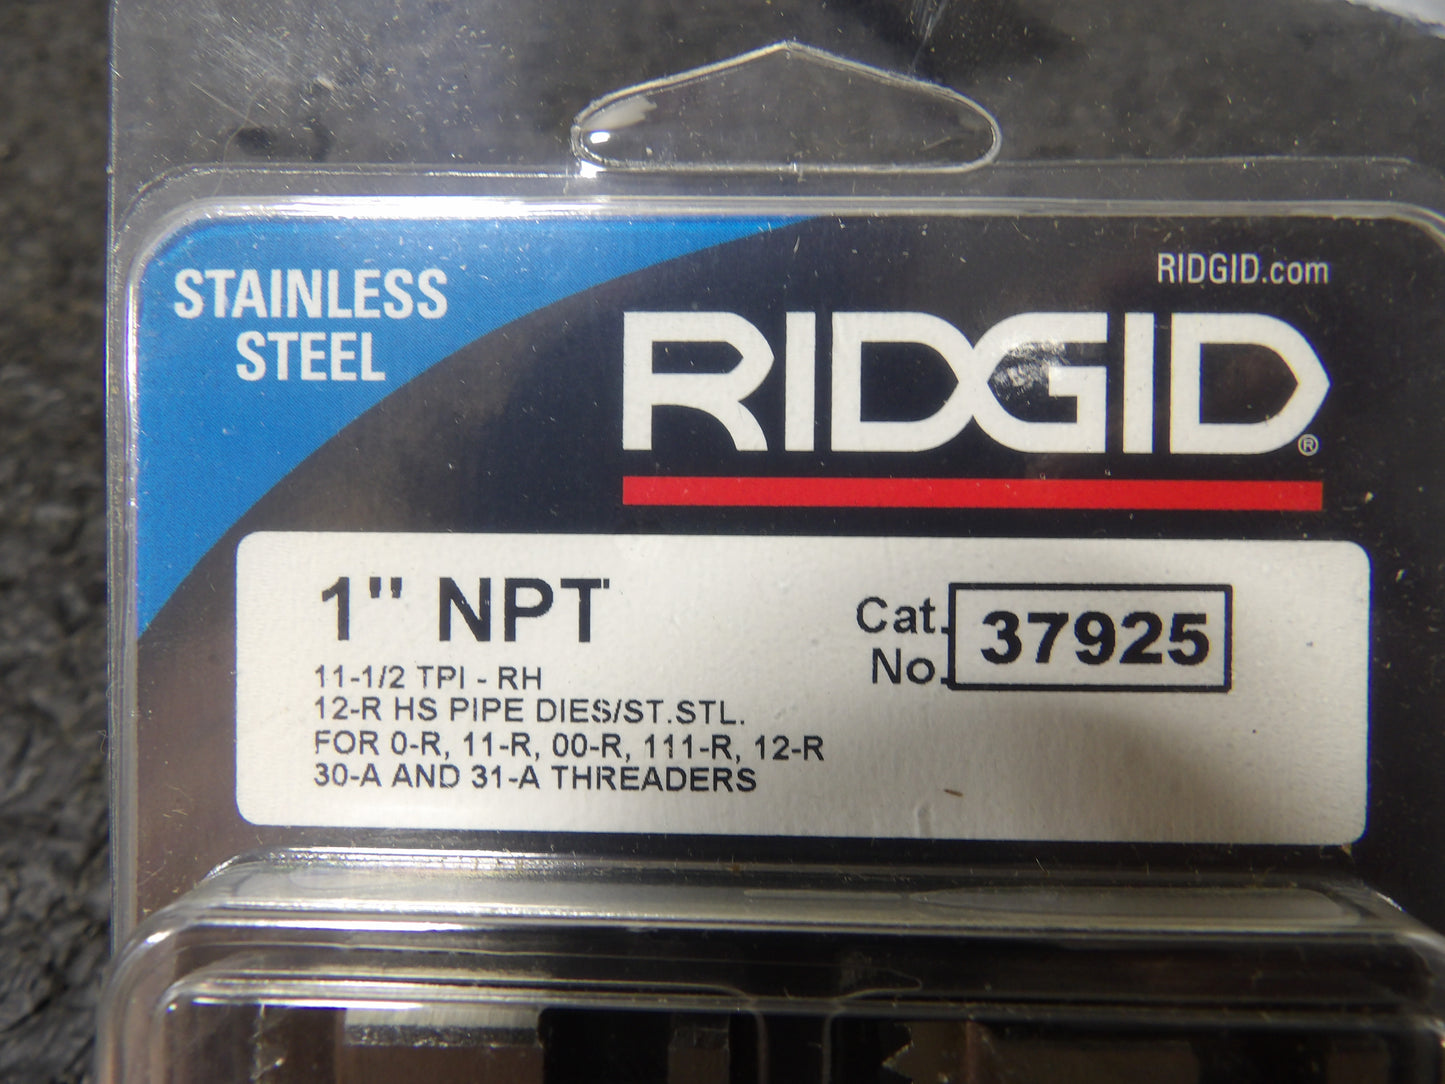 RIDGID Replacement Pipe Die: For 1 in Nominal Pipe Size, 11 1/2 Threads per Inch, NPT, Right Hand (CR00765-WTA07)